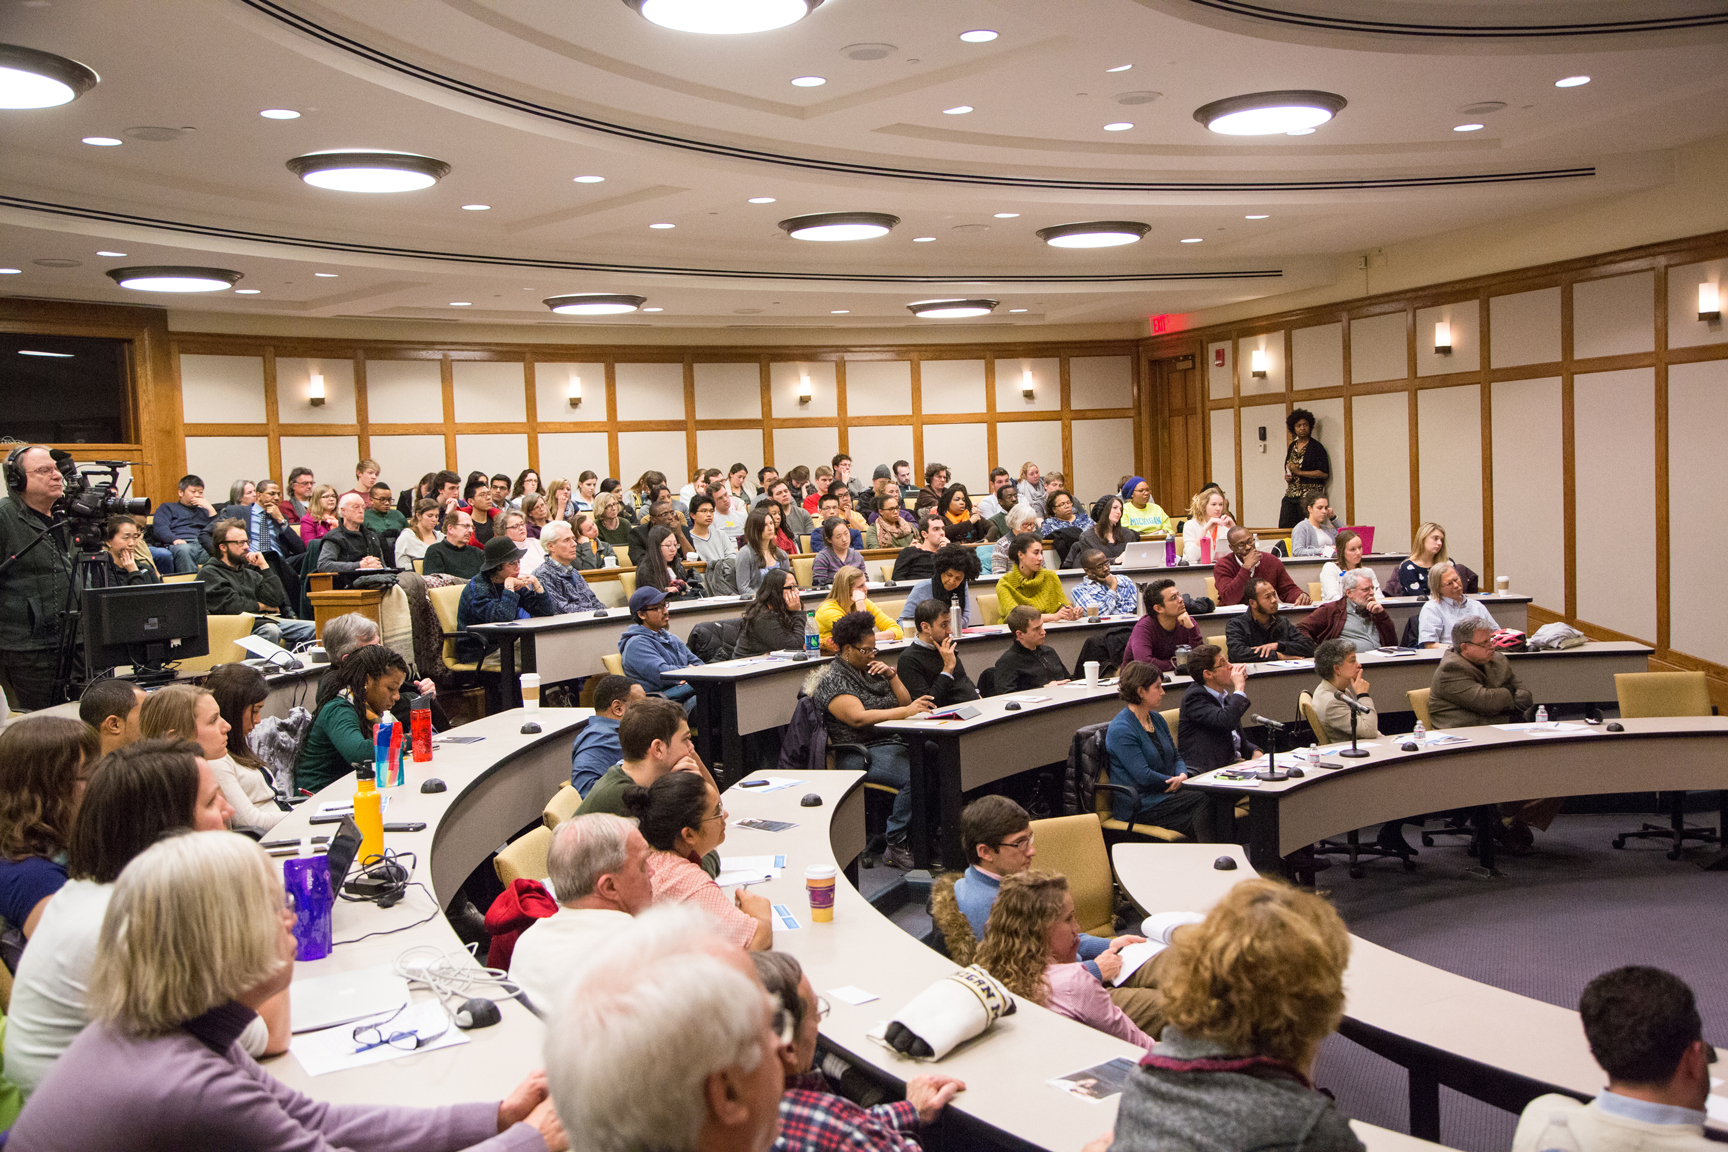 Classroom full of students at The University of Michigan